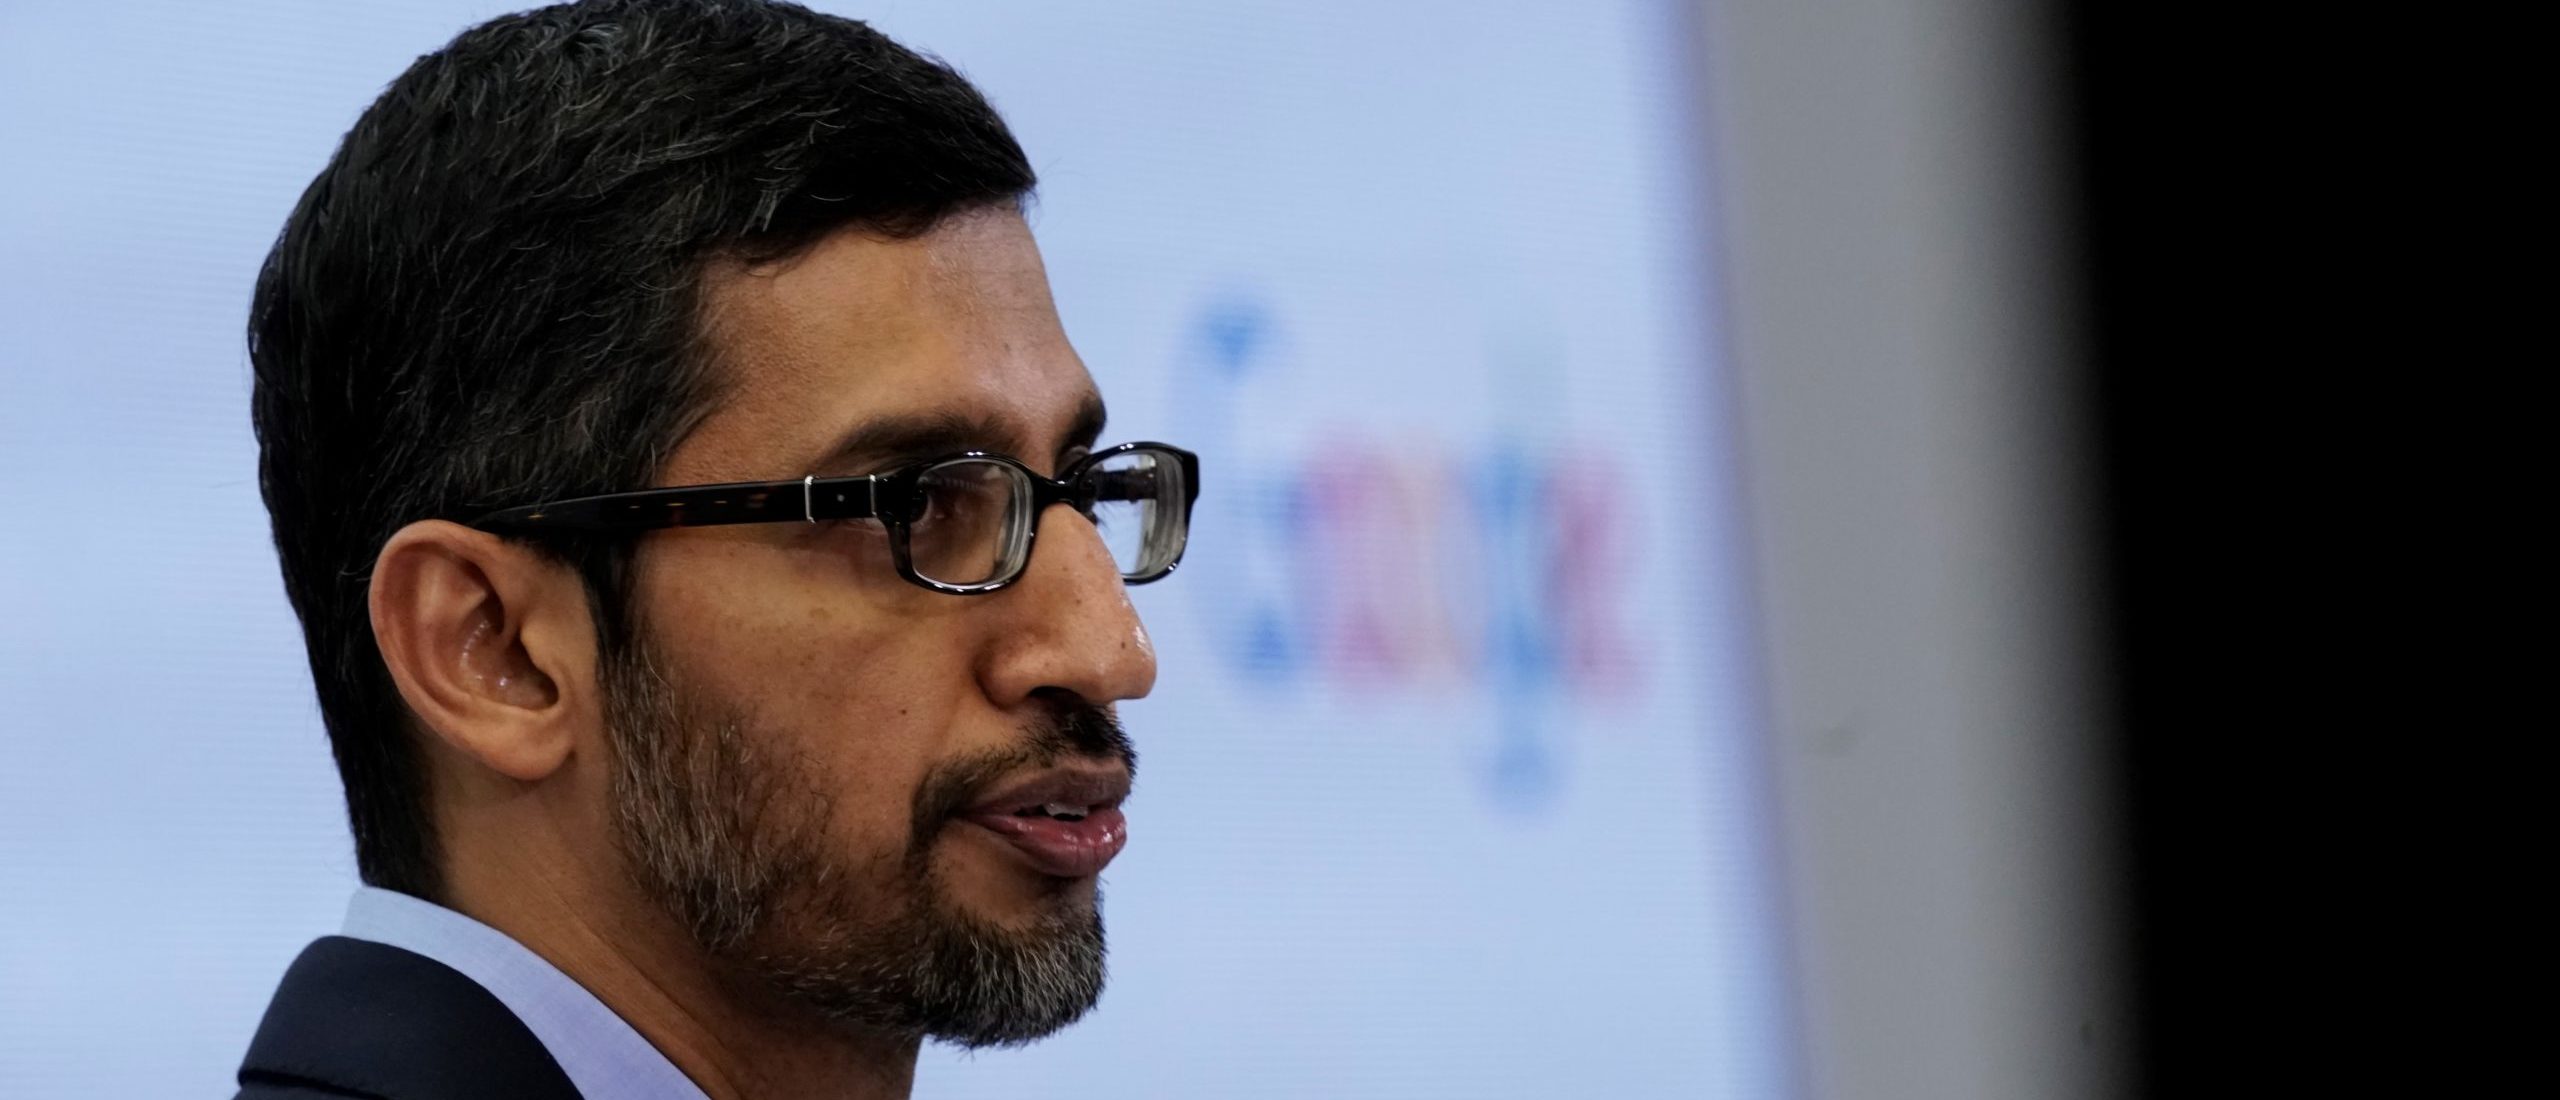 Google CEO Sundar Pichai speaks during a conference in Brussels on January 20, 2020. (Photo by KENZO TRIBOUILLARD/AFP via Getty Images)